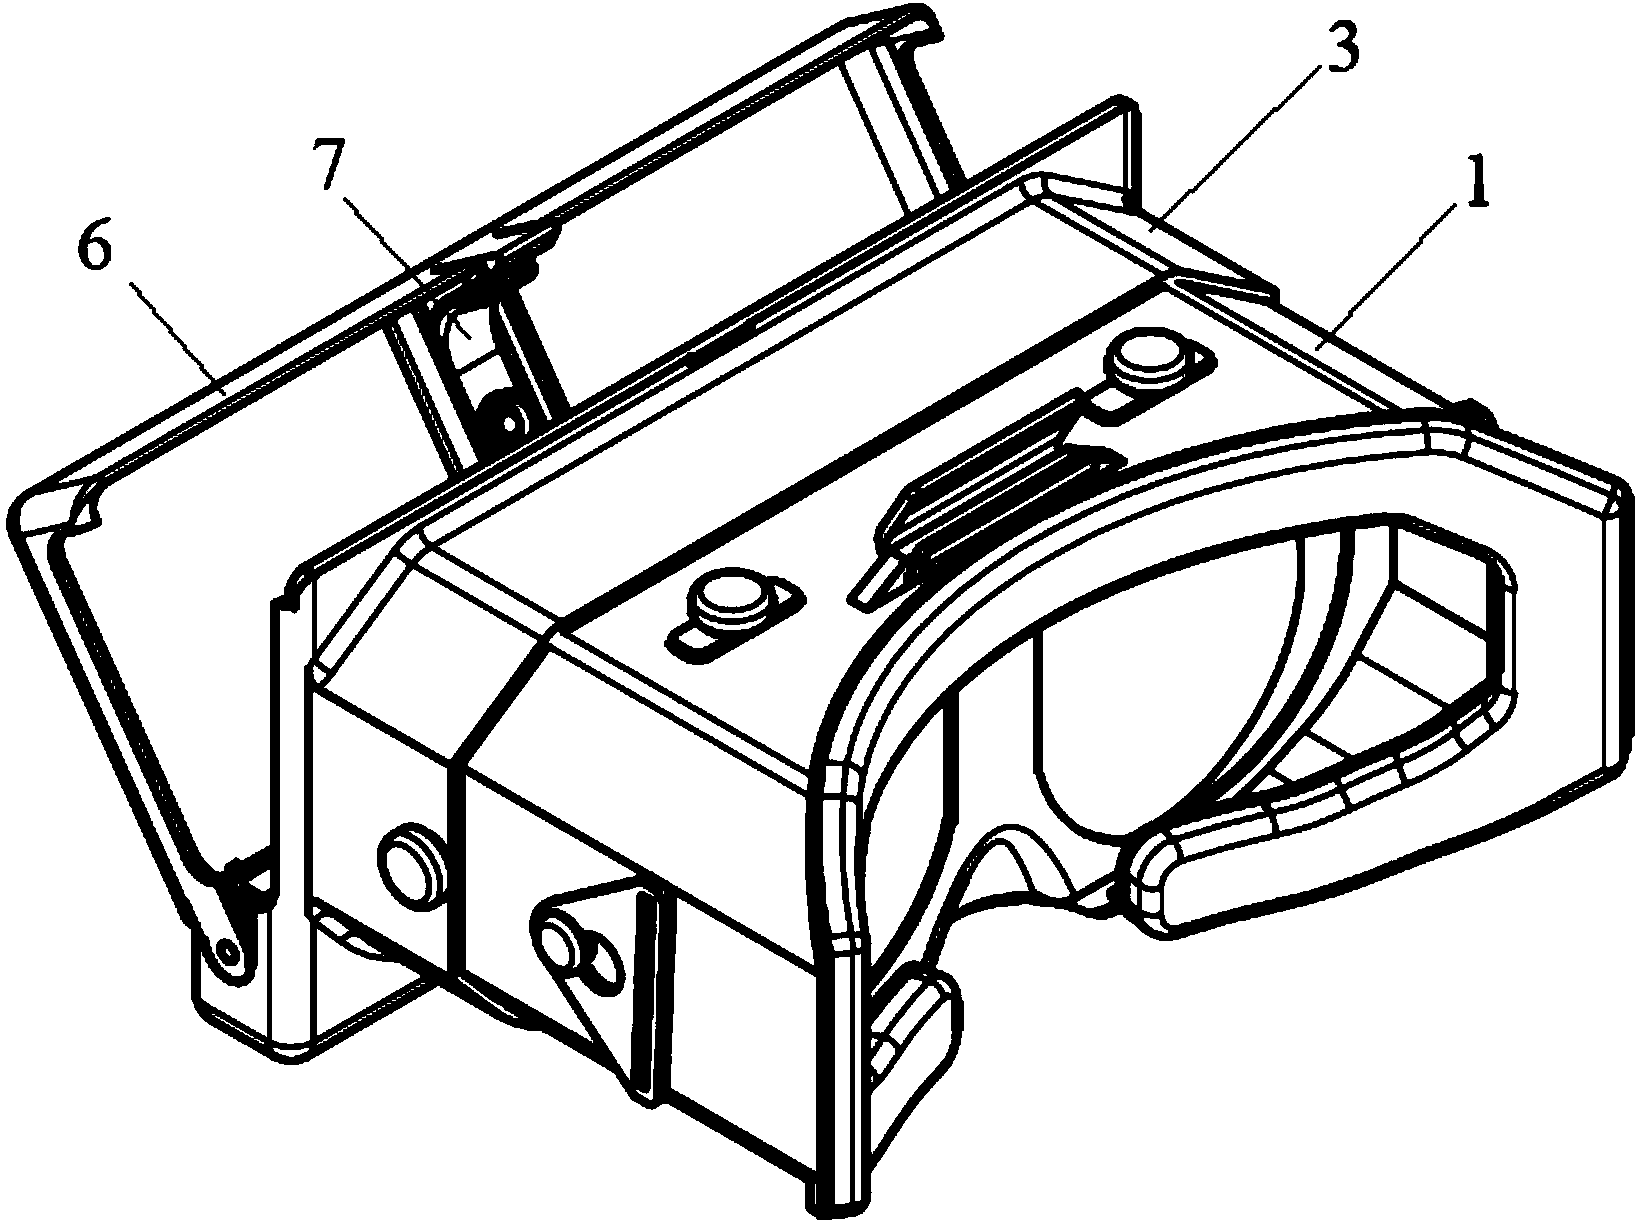 3D imaging device for mobile device